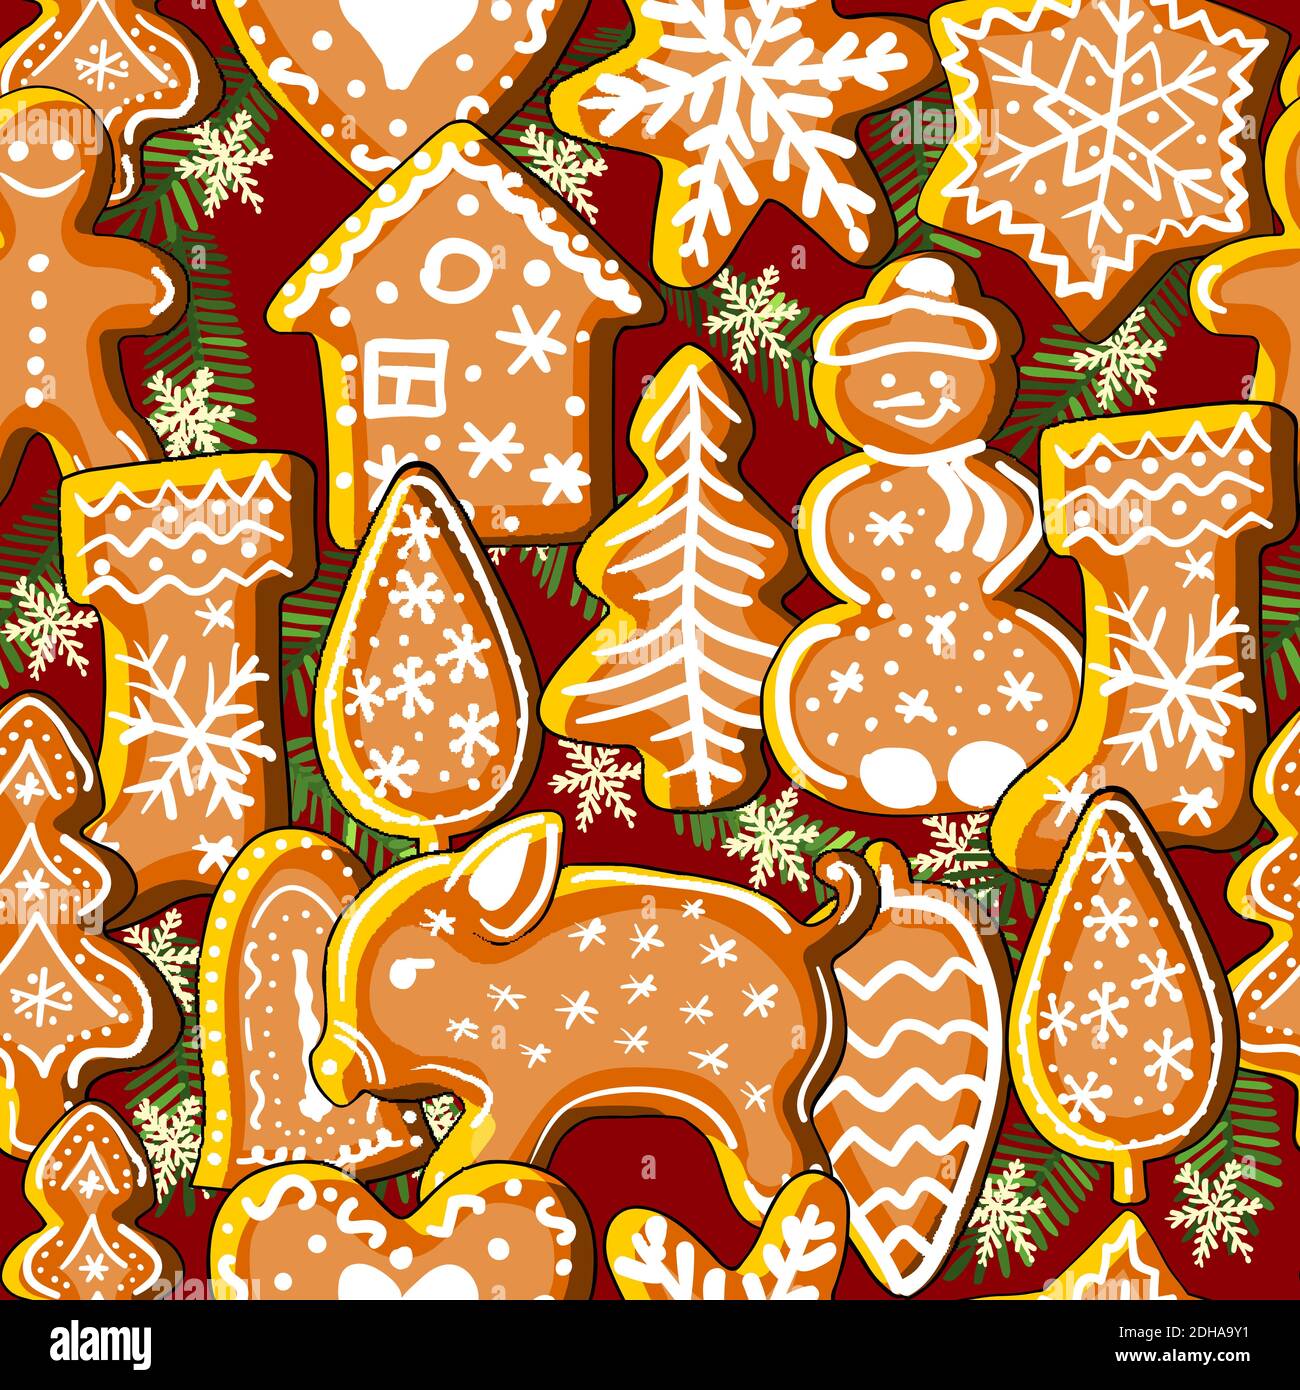 Endless texture with traditional Christmas symbols. Seamless vector pattern for your festive design, fabrics, wallpapers, greeting cards, Stock Vector